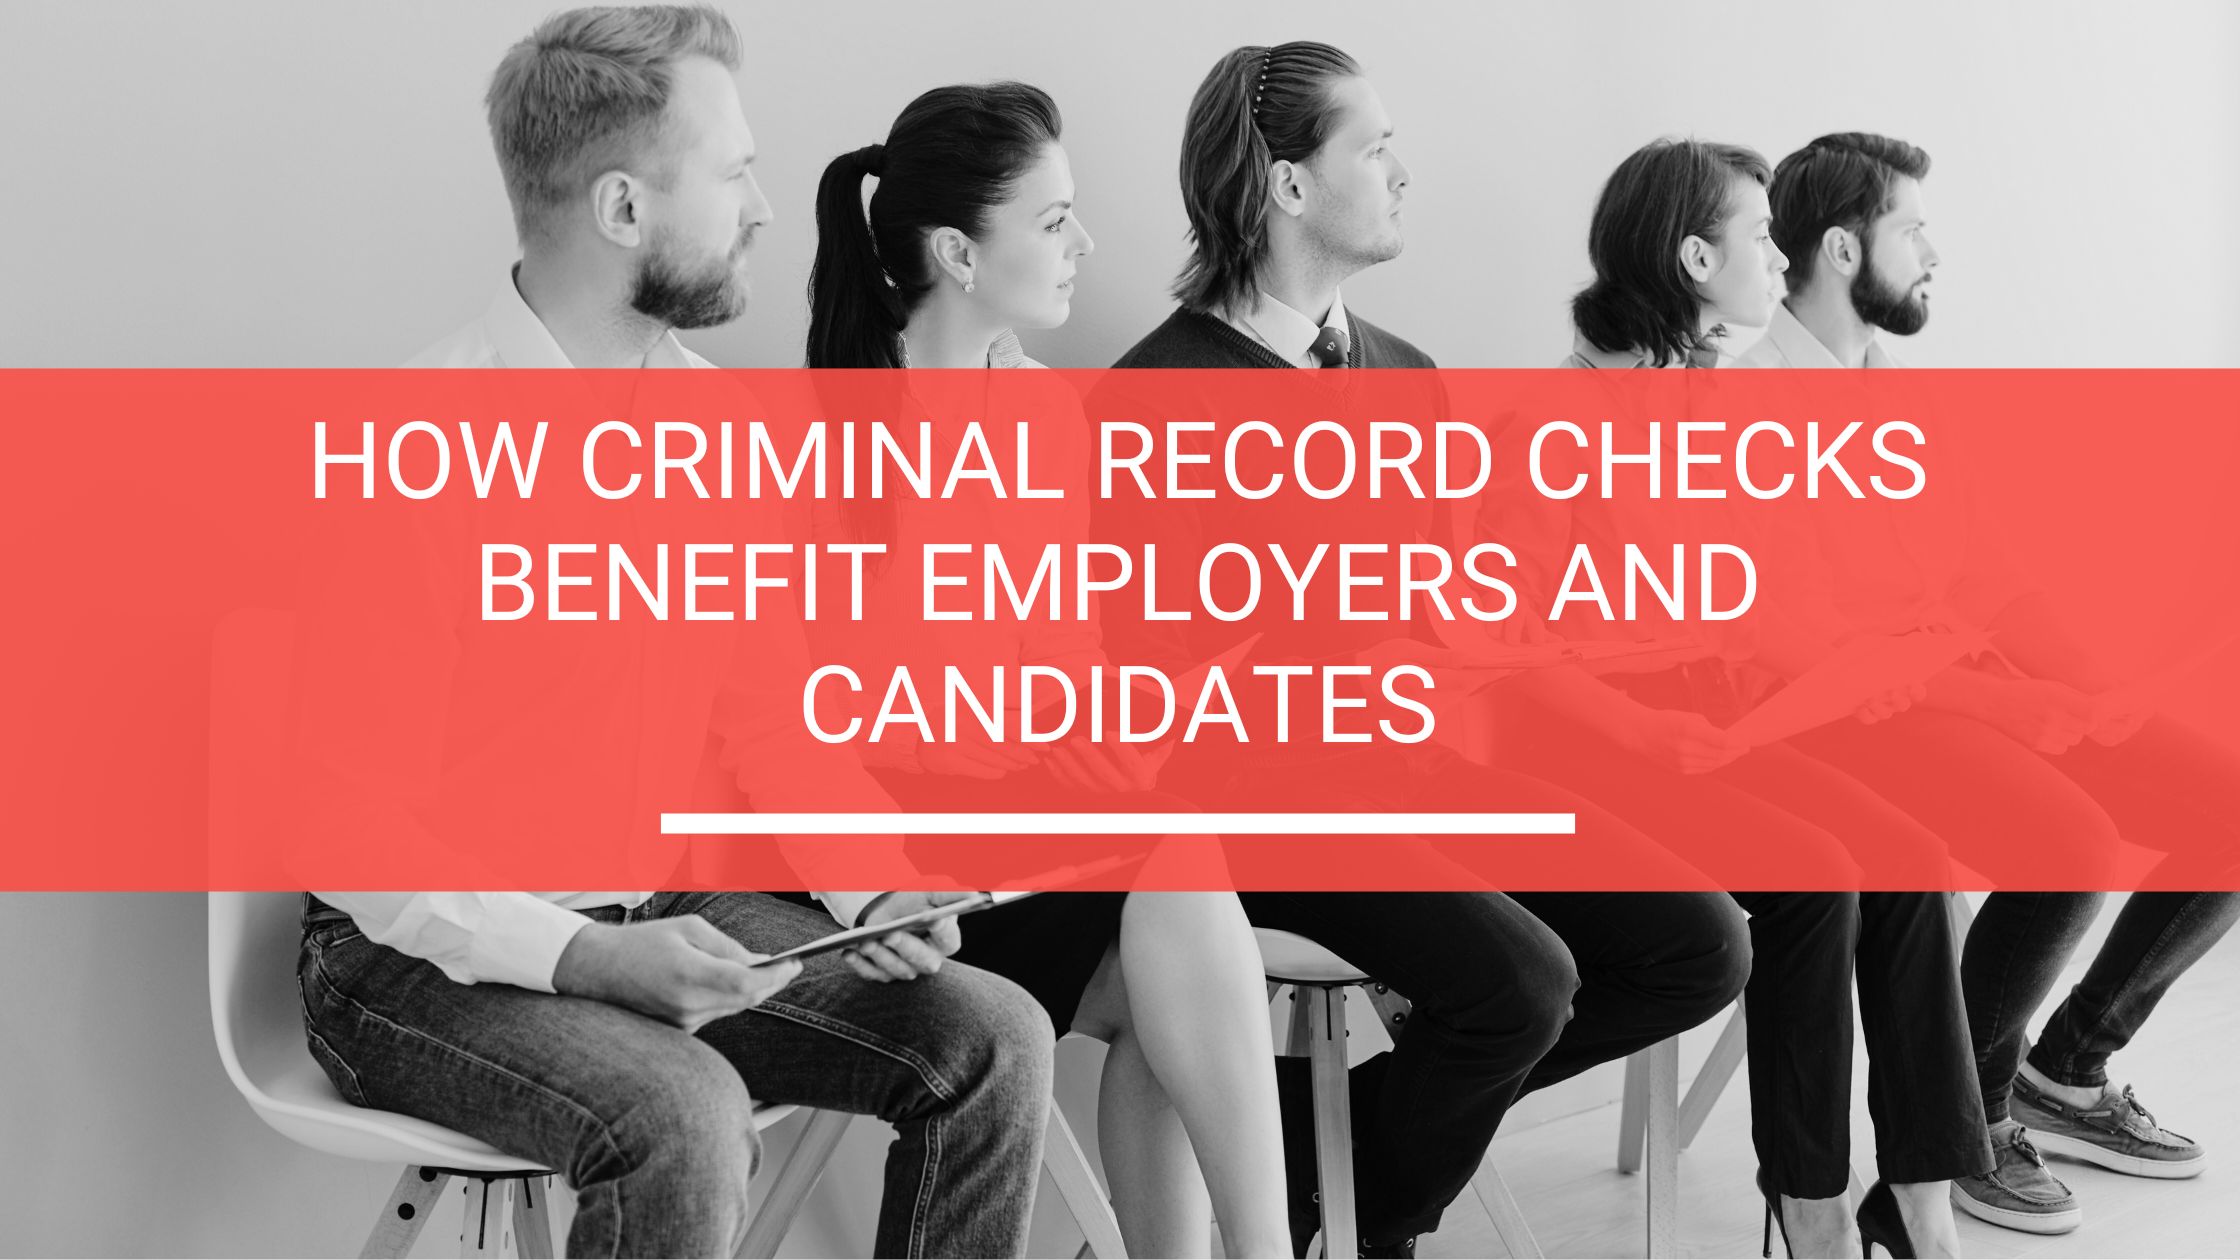 How Criminal Record Checks Benefit Employers and Candidates